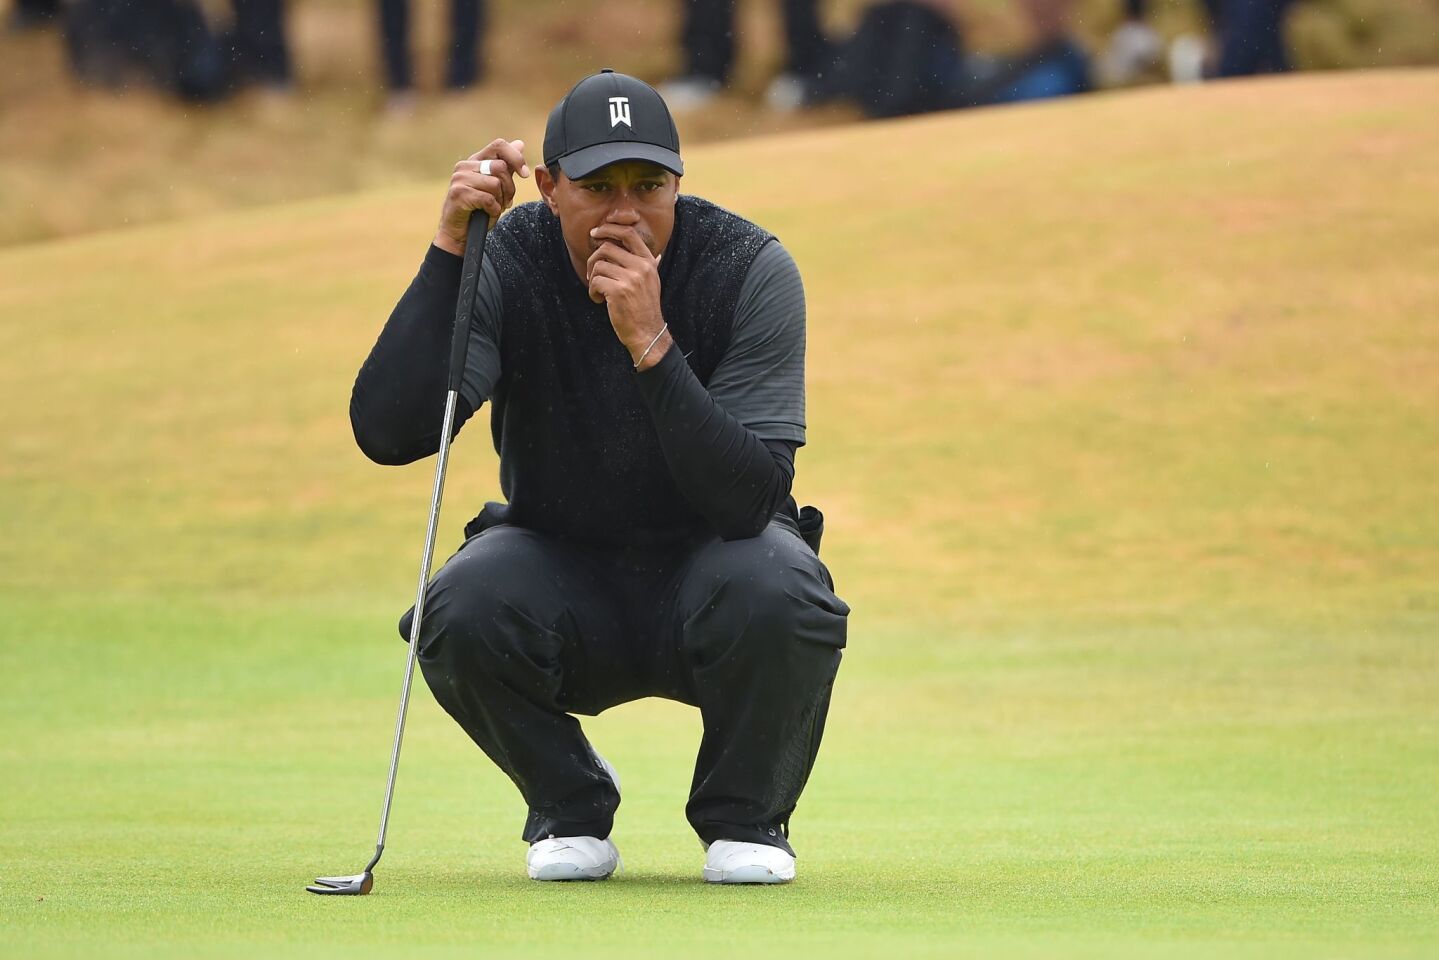 Tiger Woods studies a putt on the ninth green during the second round of the British Open.